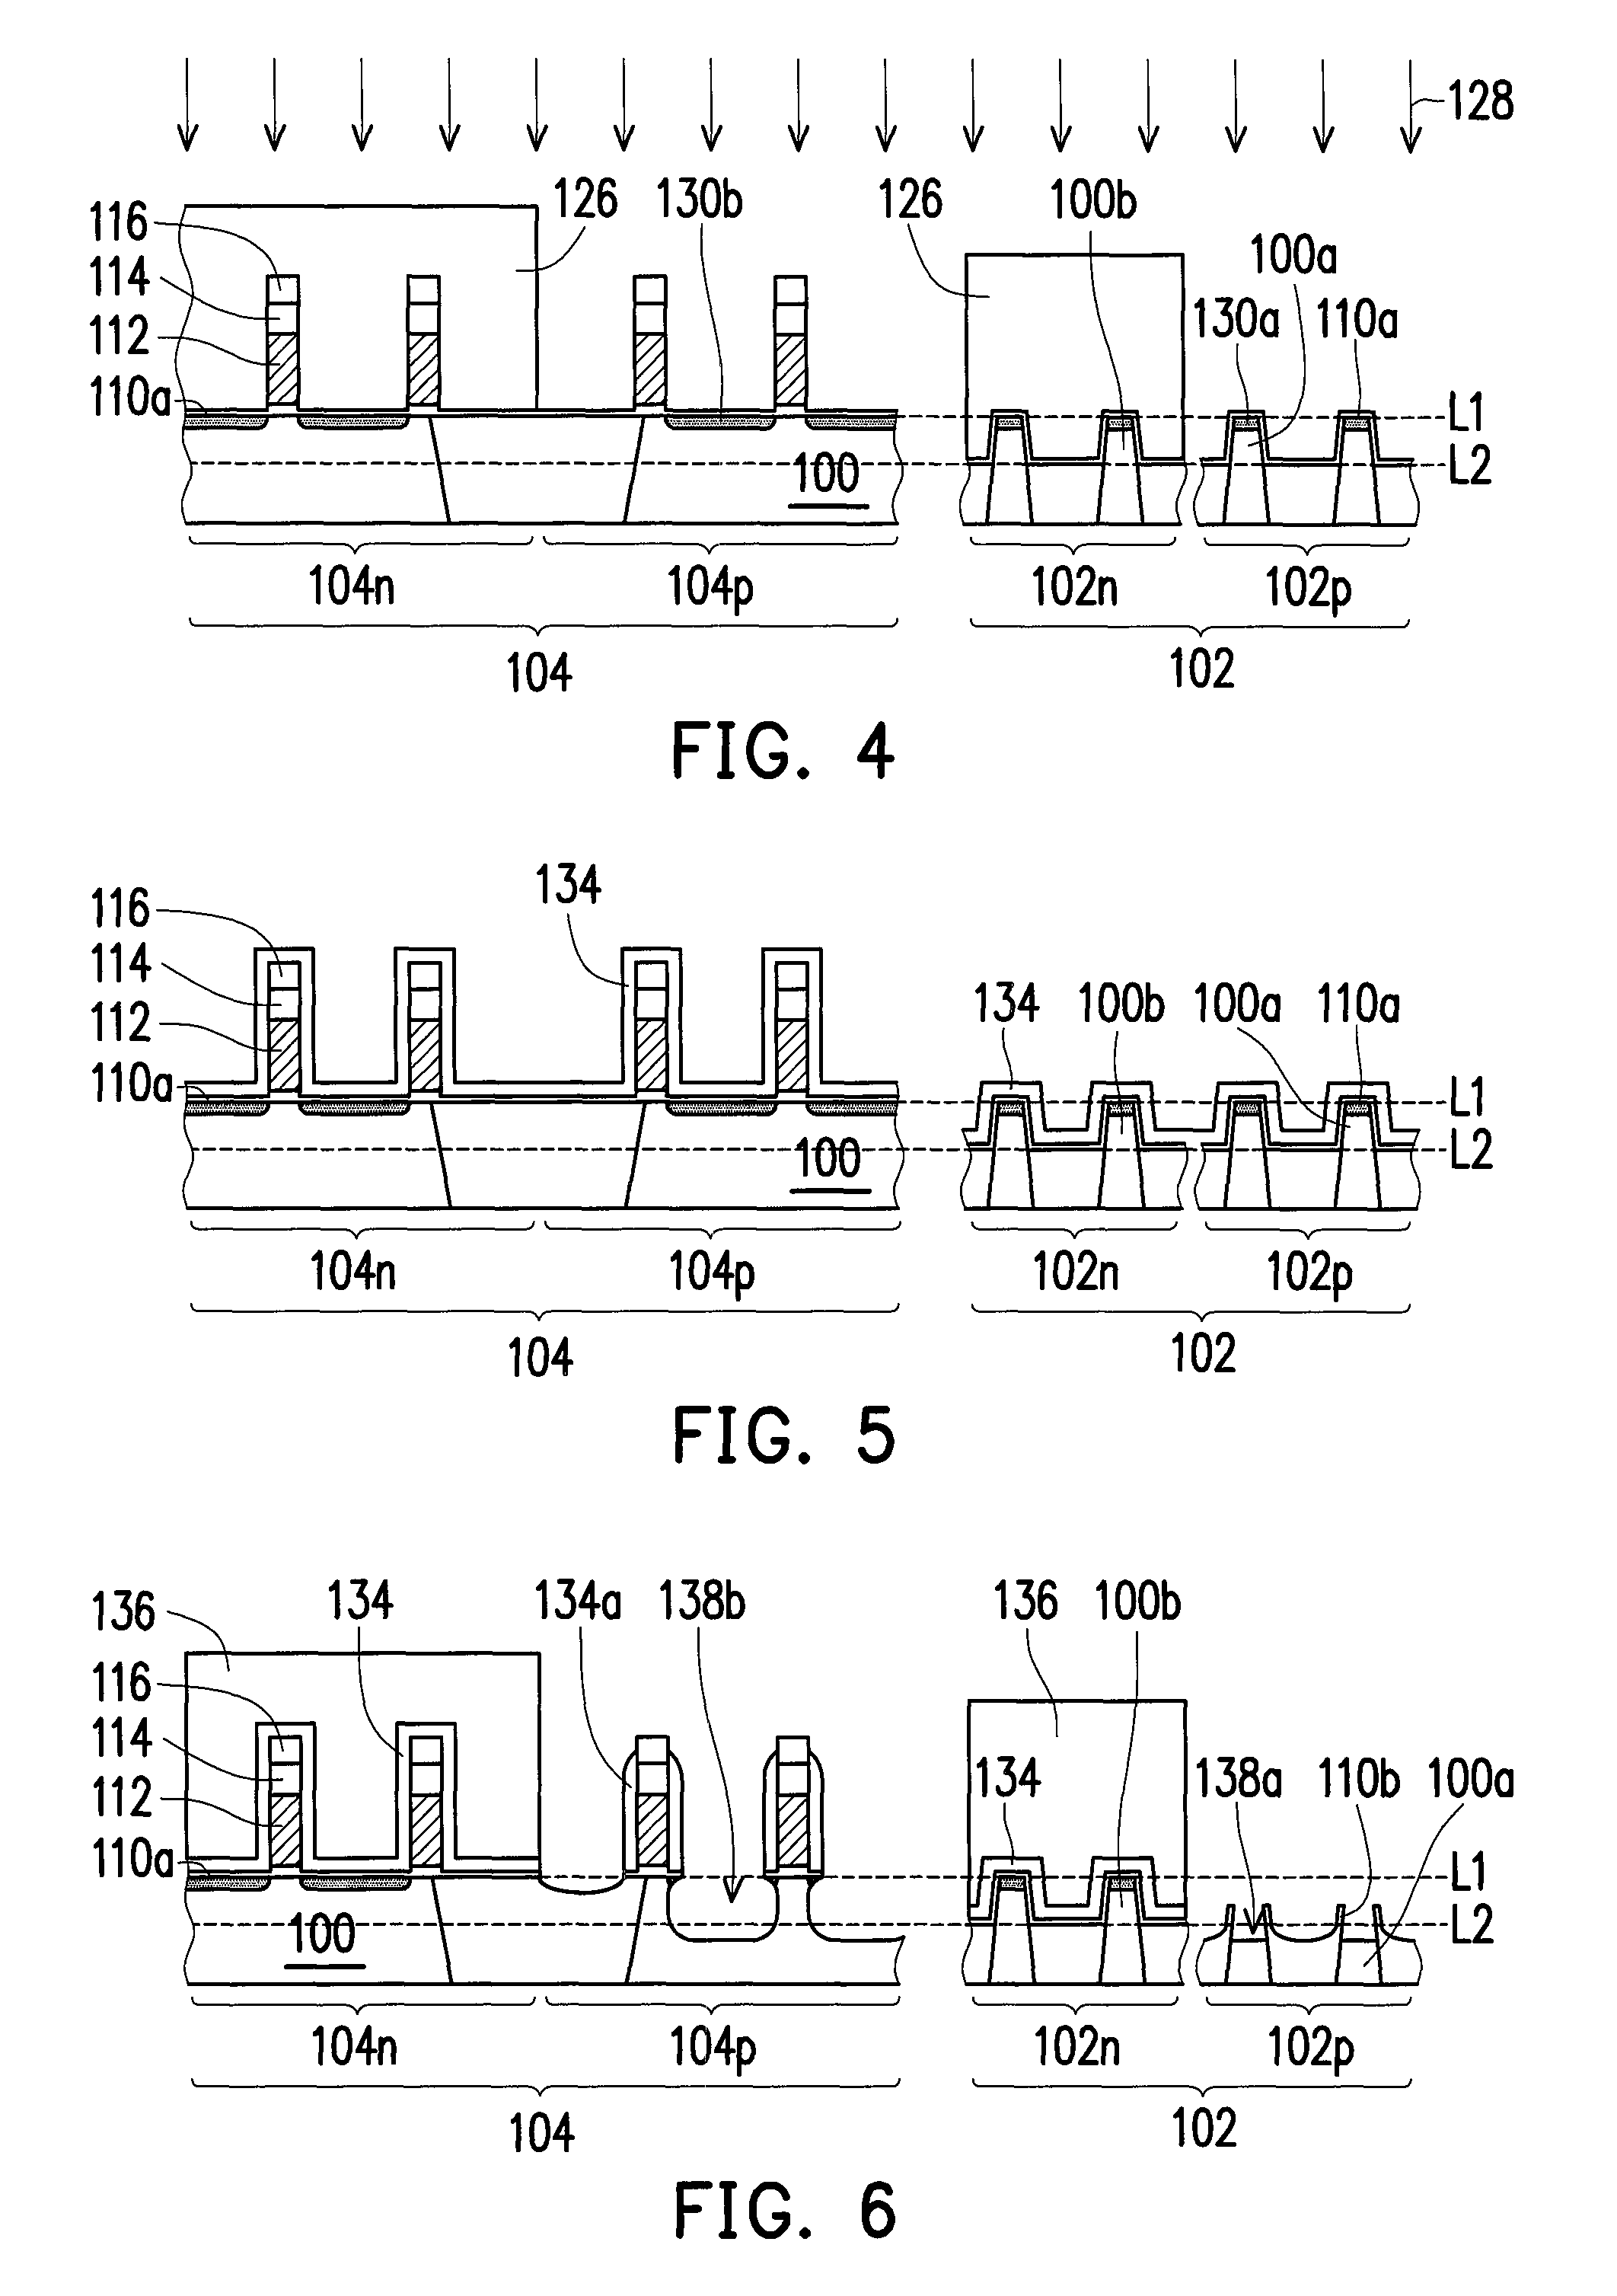 FinFET structure with cavities and semiconductor compound portions extending laterally over sidewall spacers